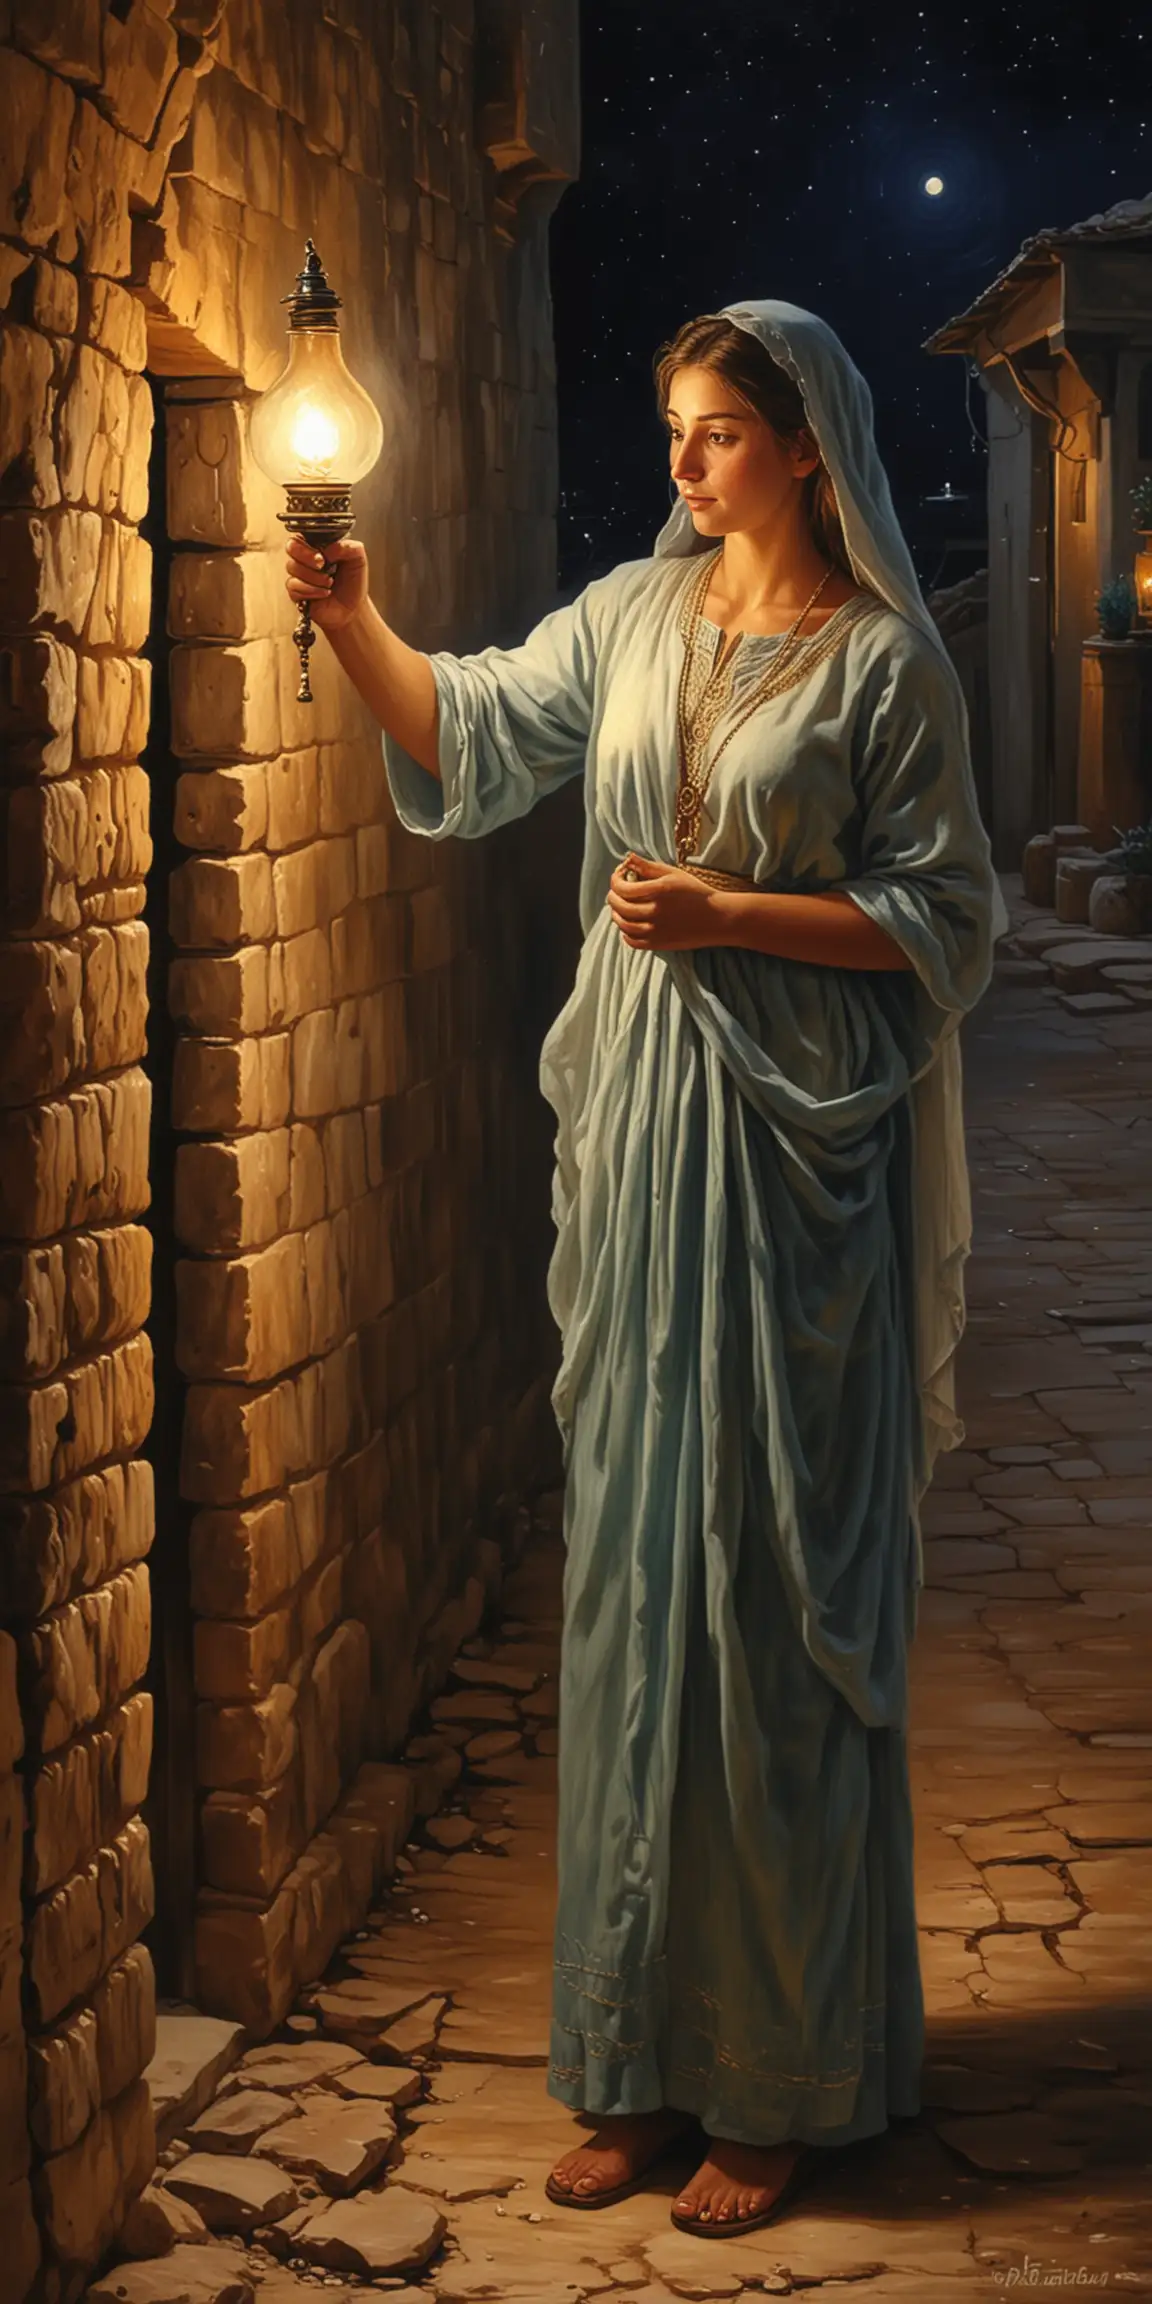 Ancient Israelite Girl Holding Clay Lamp at Night